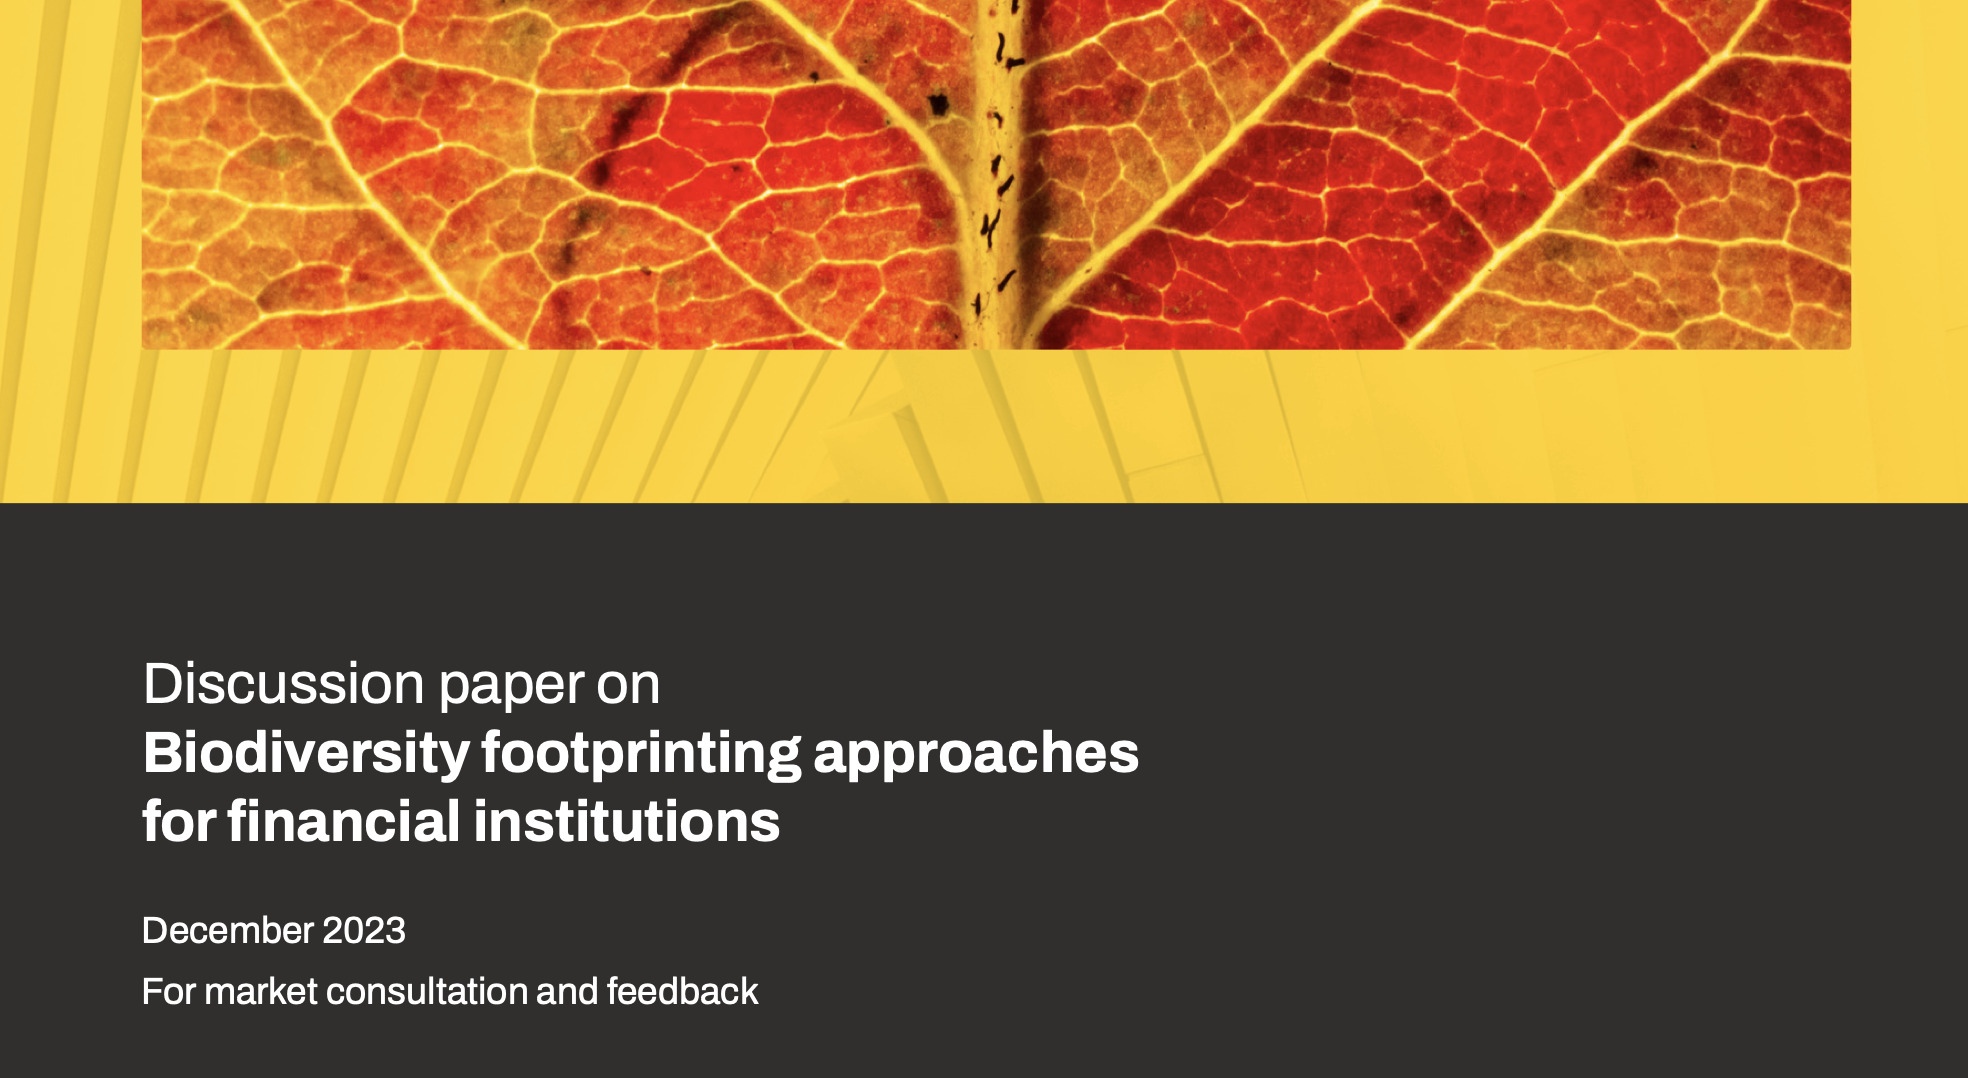 Discussion paper on biodiversity footprinting approaches for financial institutions